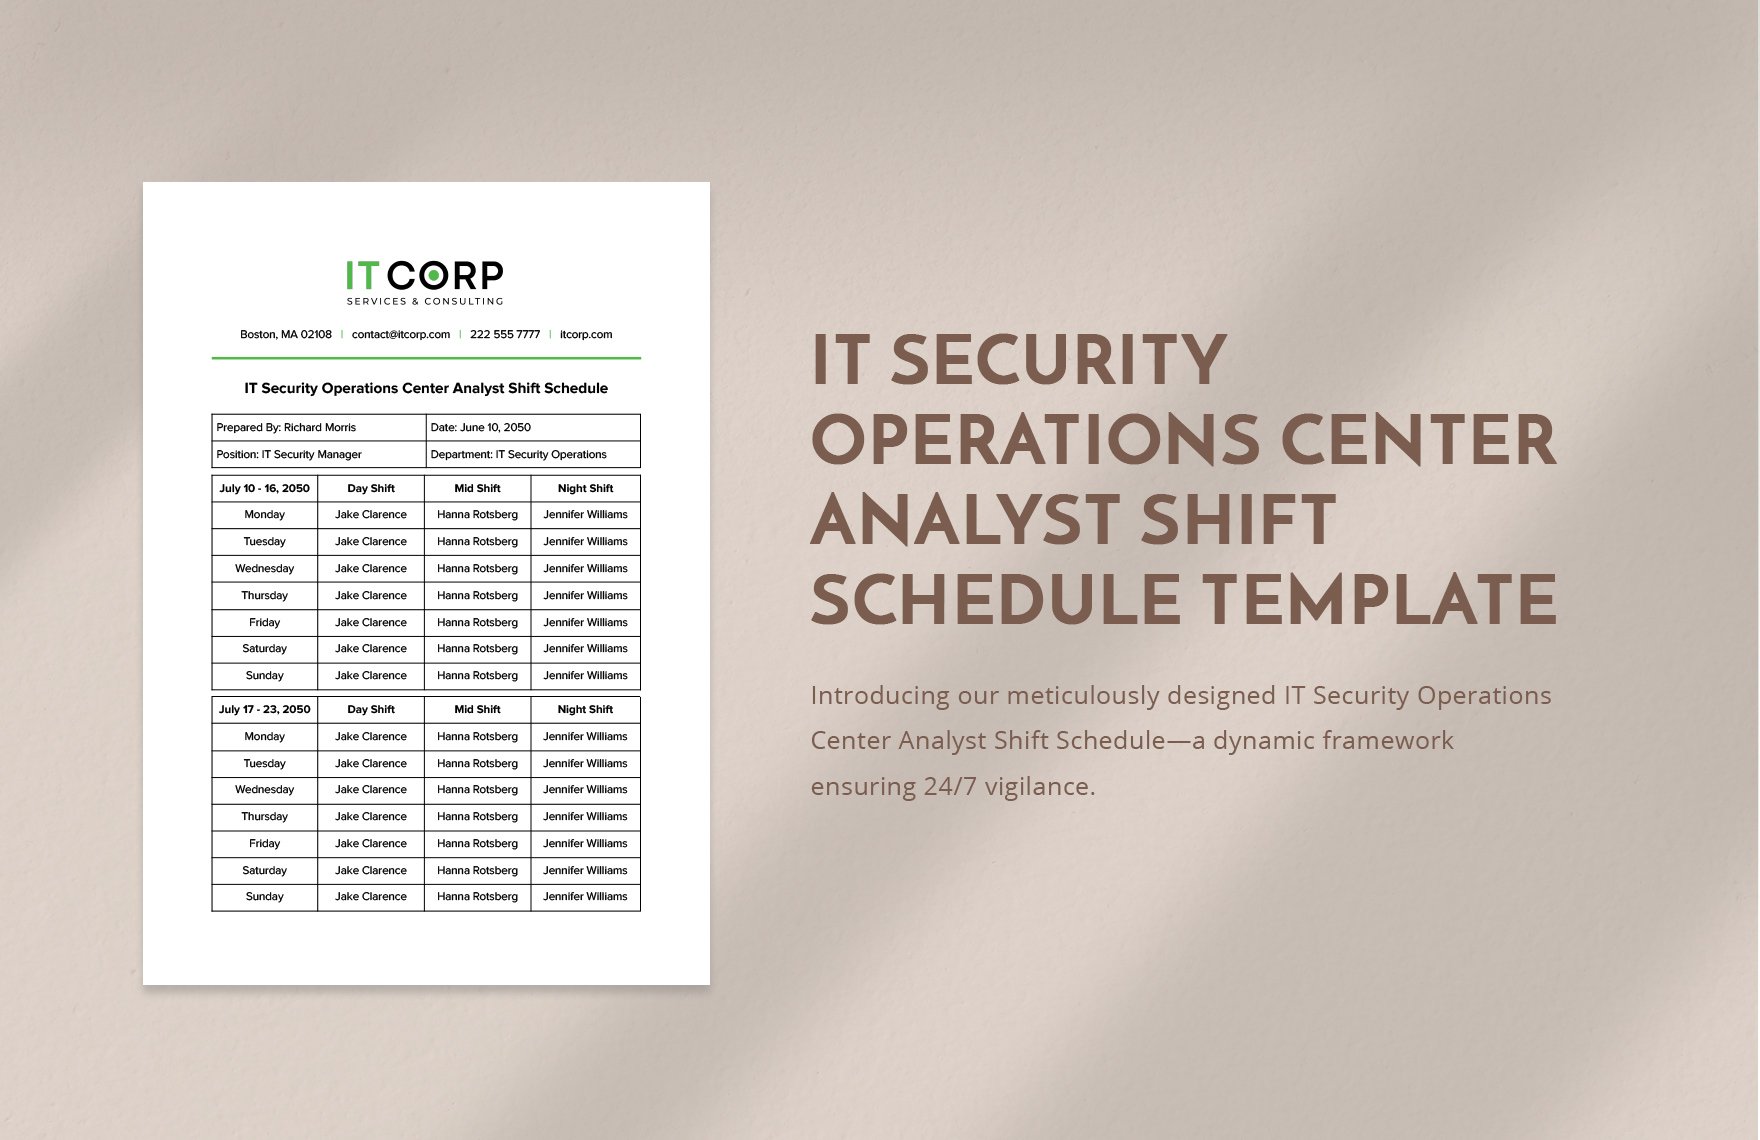 IT Security Operations Center Analyst Shift Schedule Template in Word, Google Docs, PDF